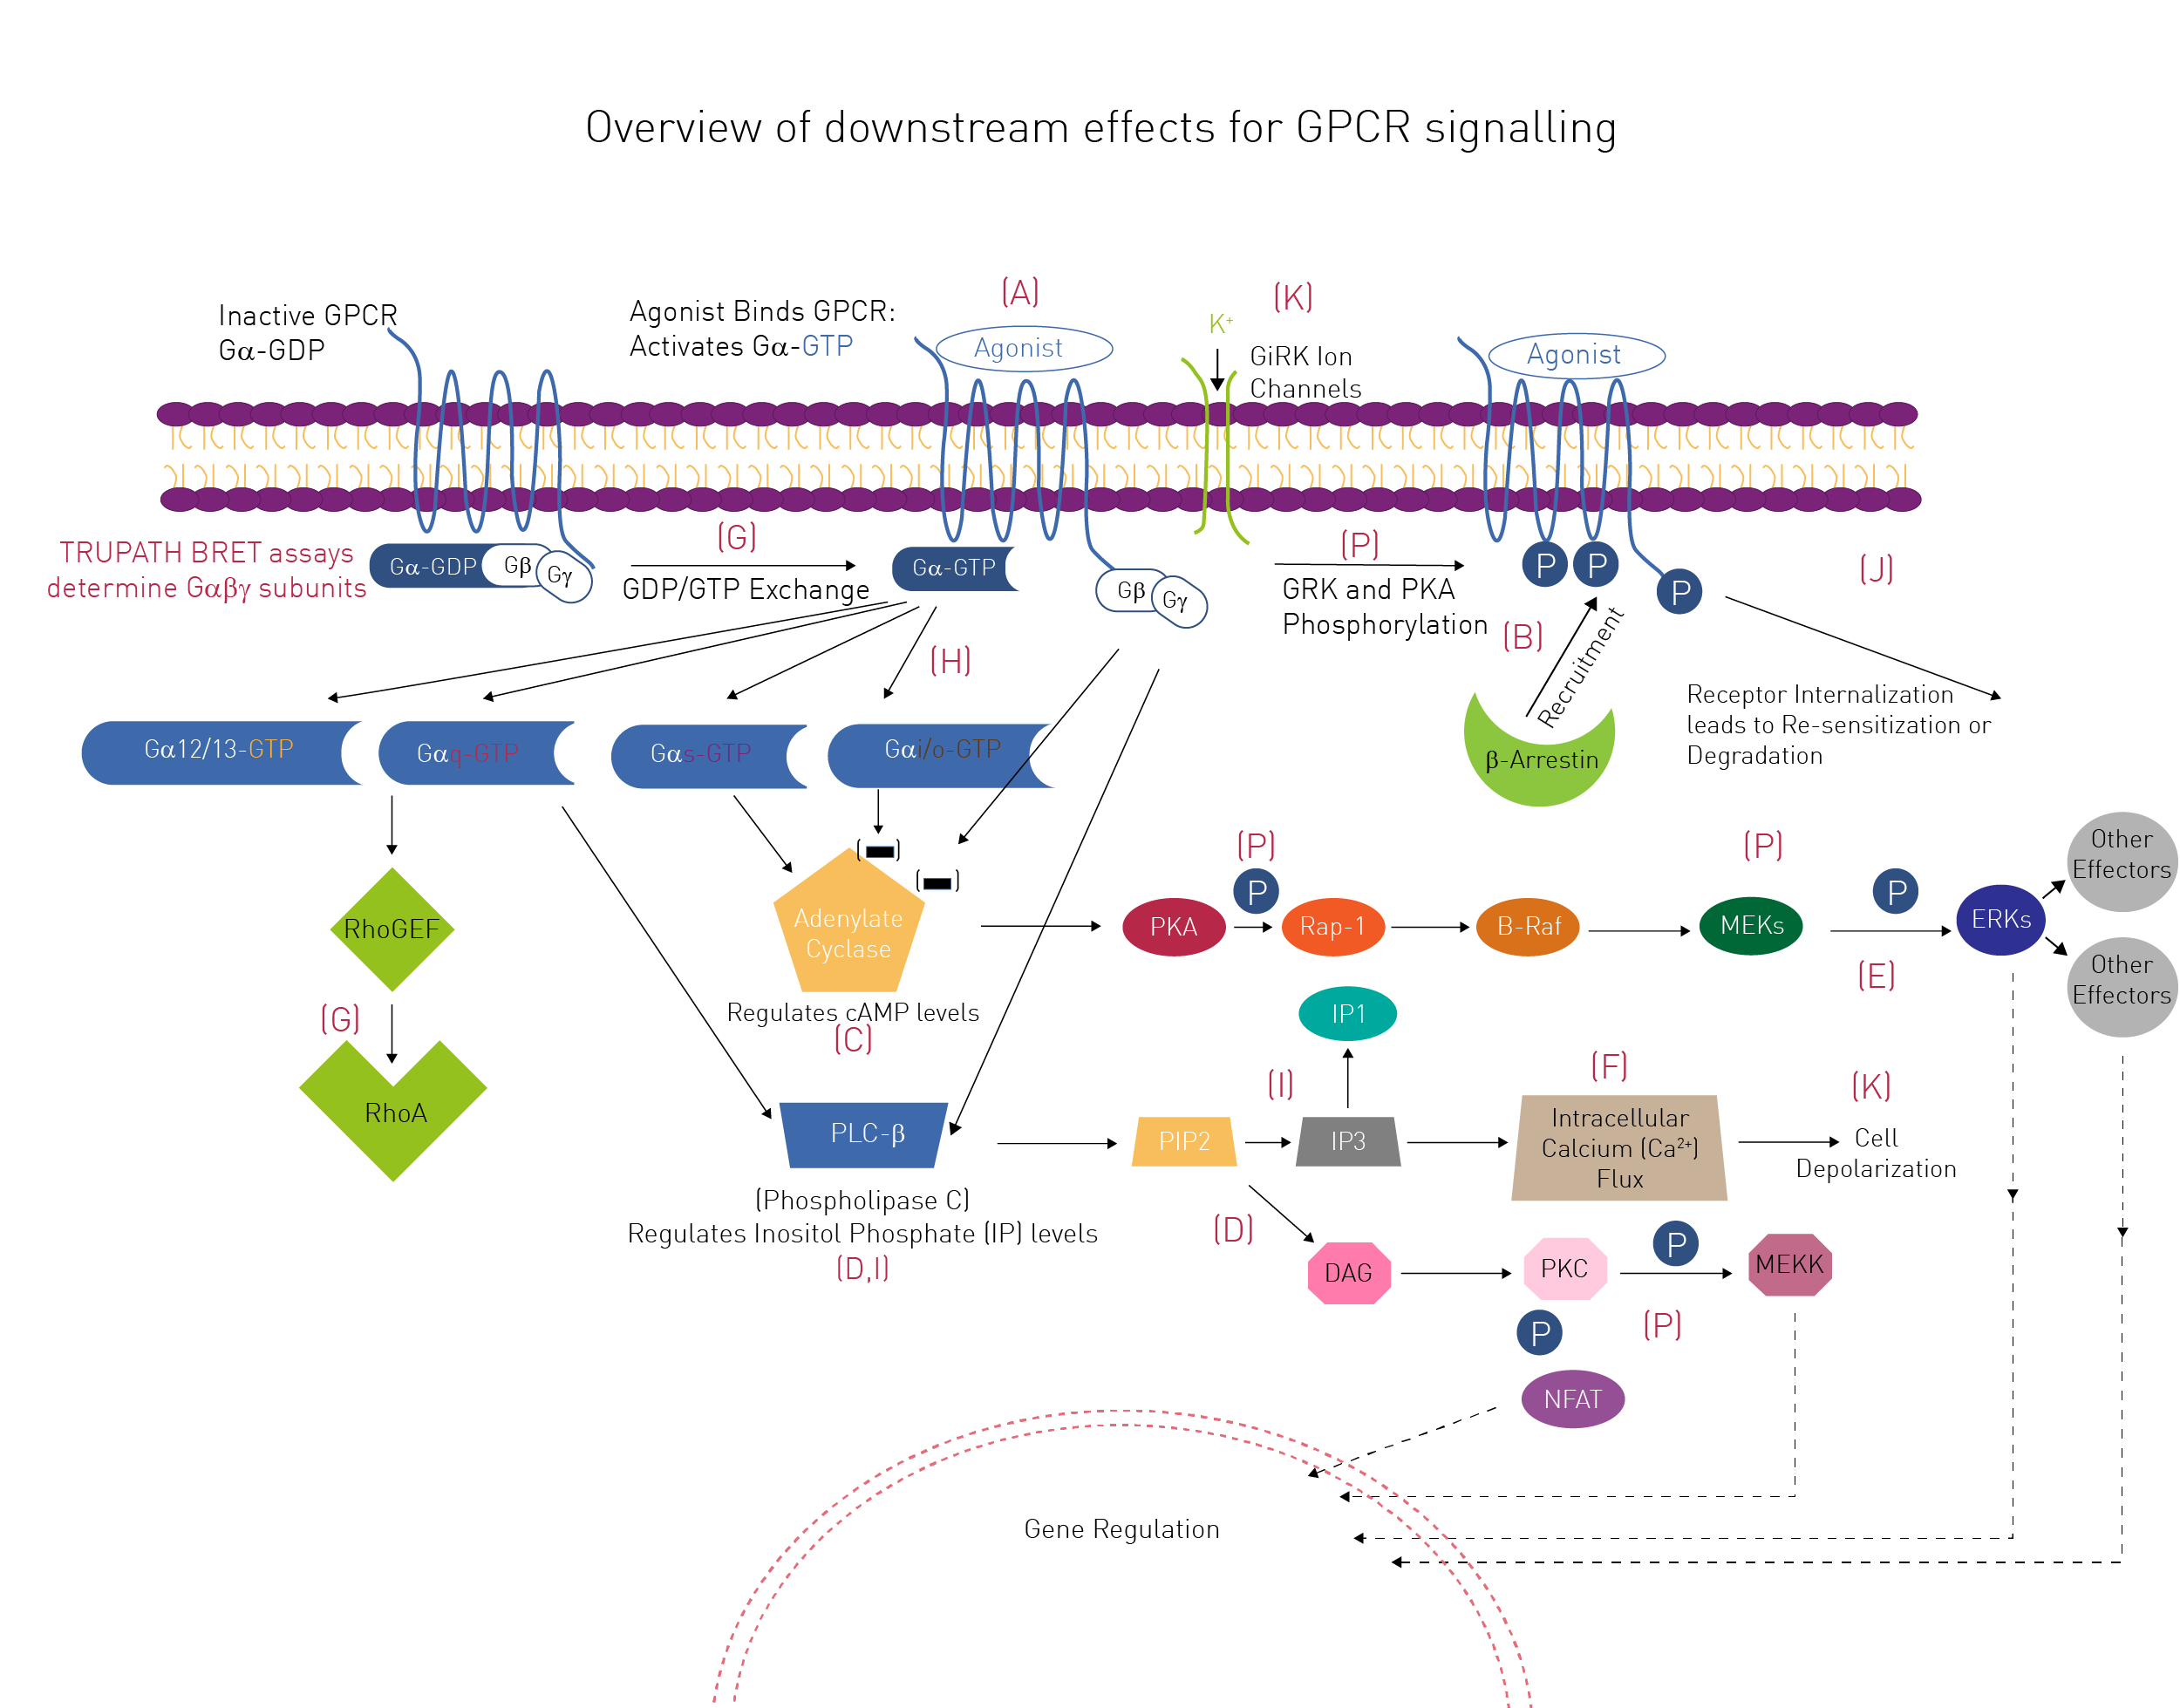 Fig.2: Overview of selected downstream effects of GPCR signaling.